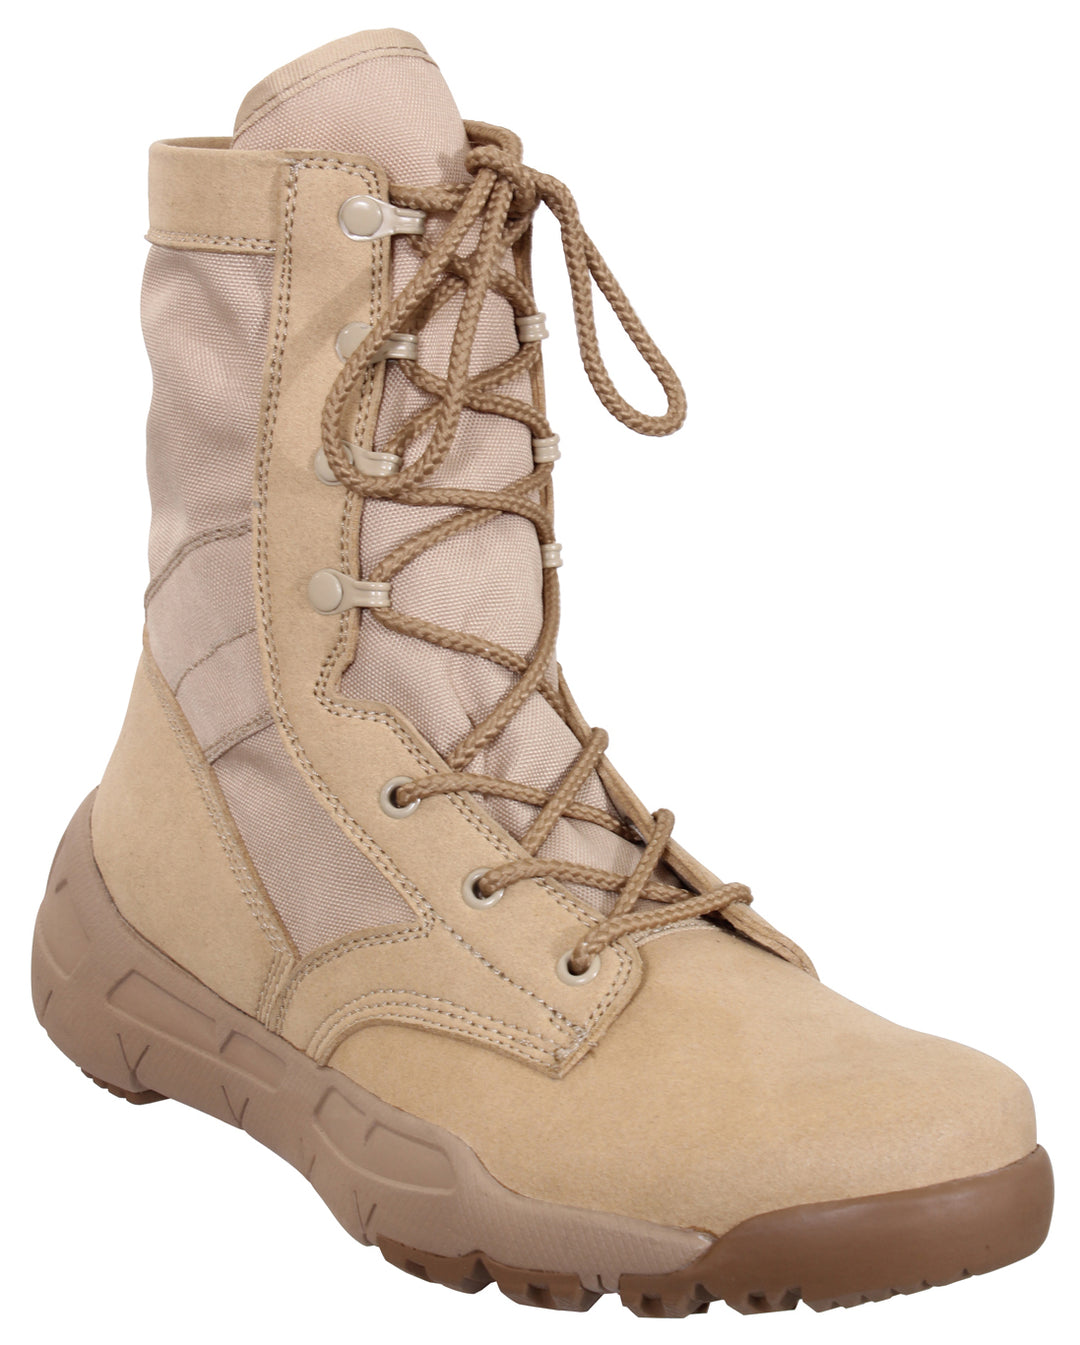 V-Max Lightweight Tactical Boot - 8 Inch by Rothco